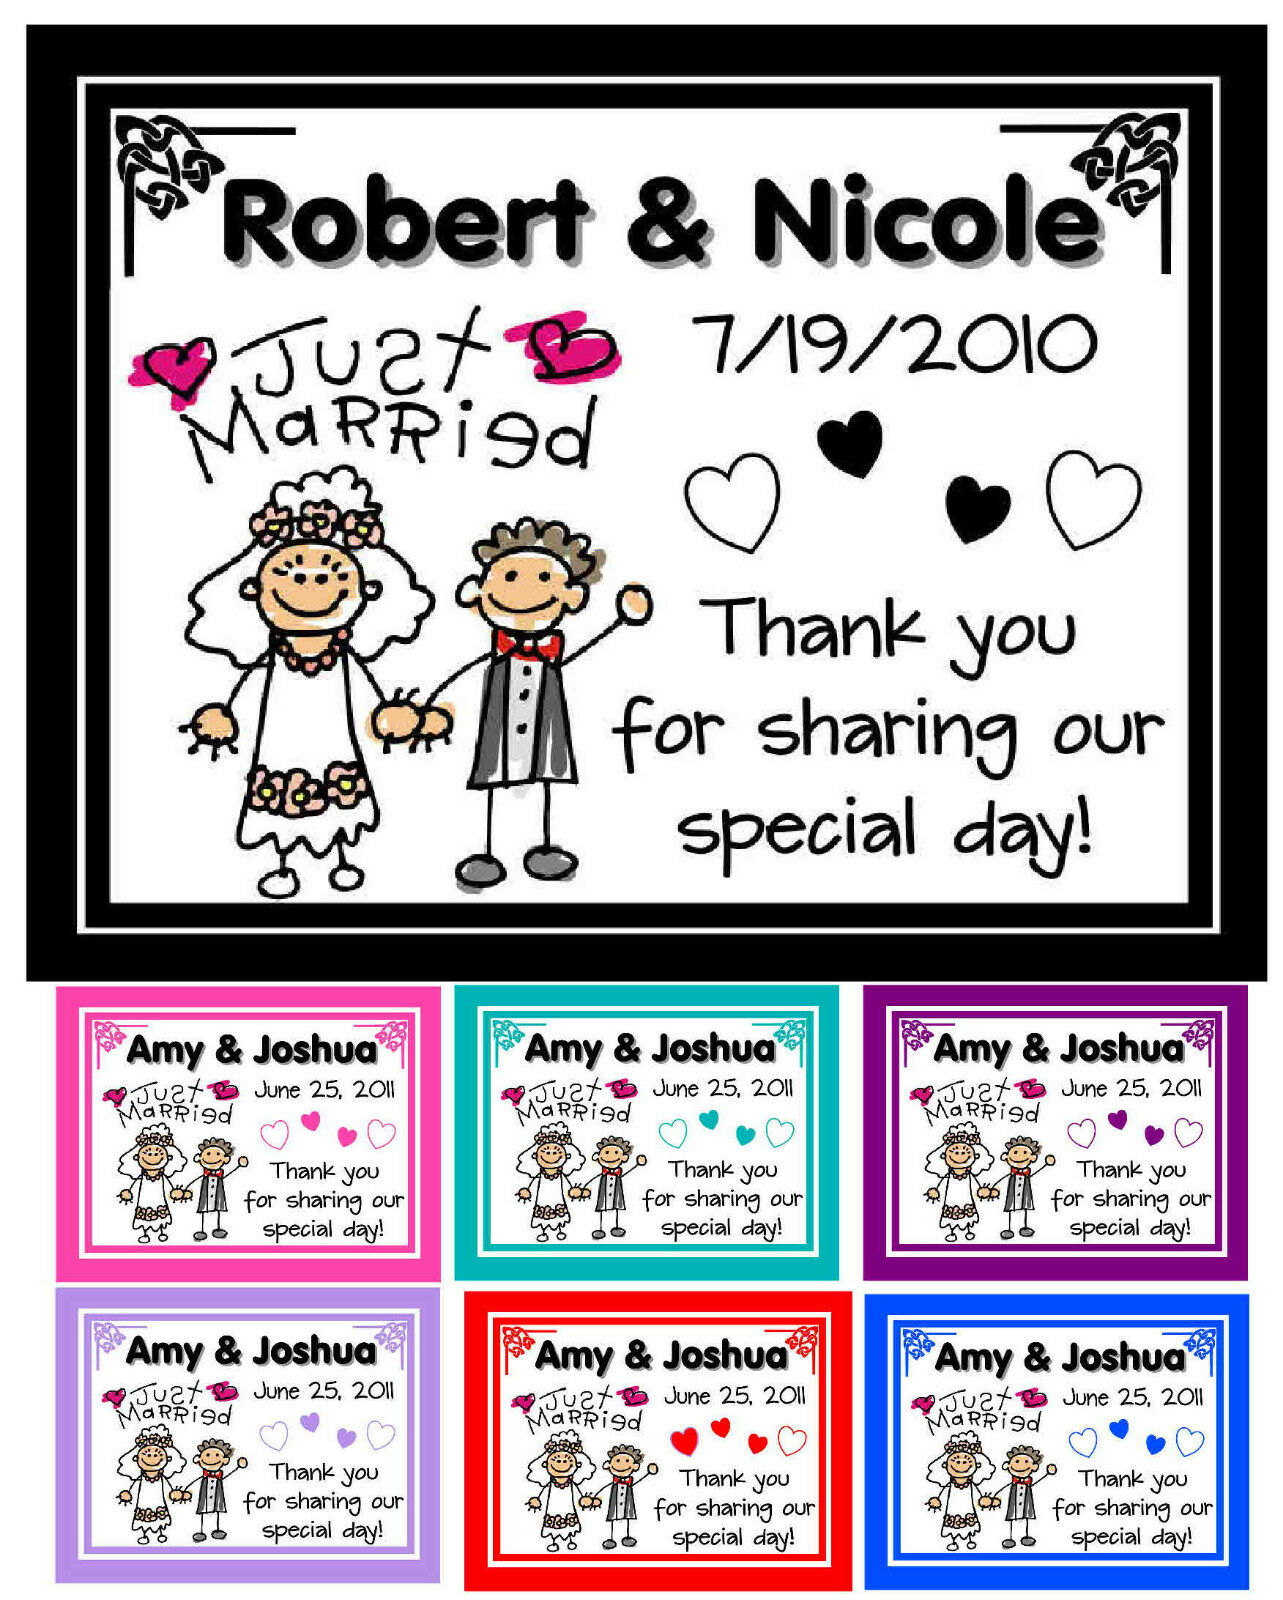 WEDDING FAVORS MAGNETS ~ YOUR CHOICE OF COLORS